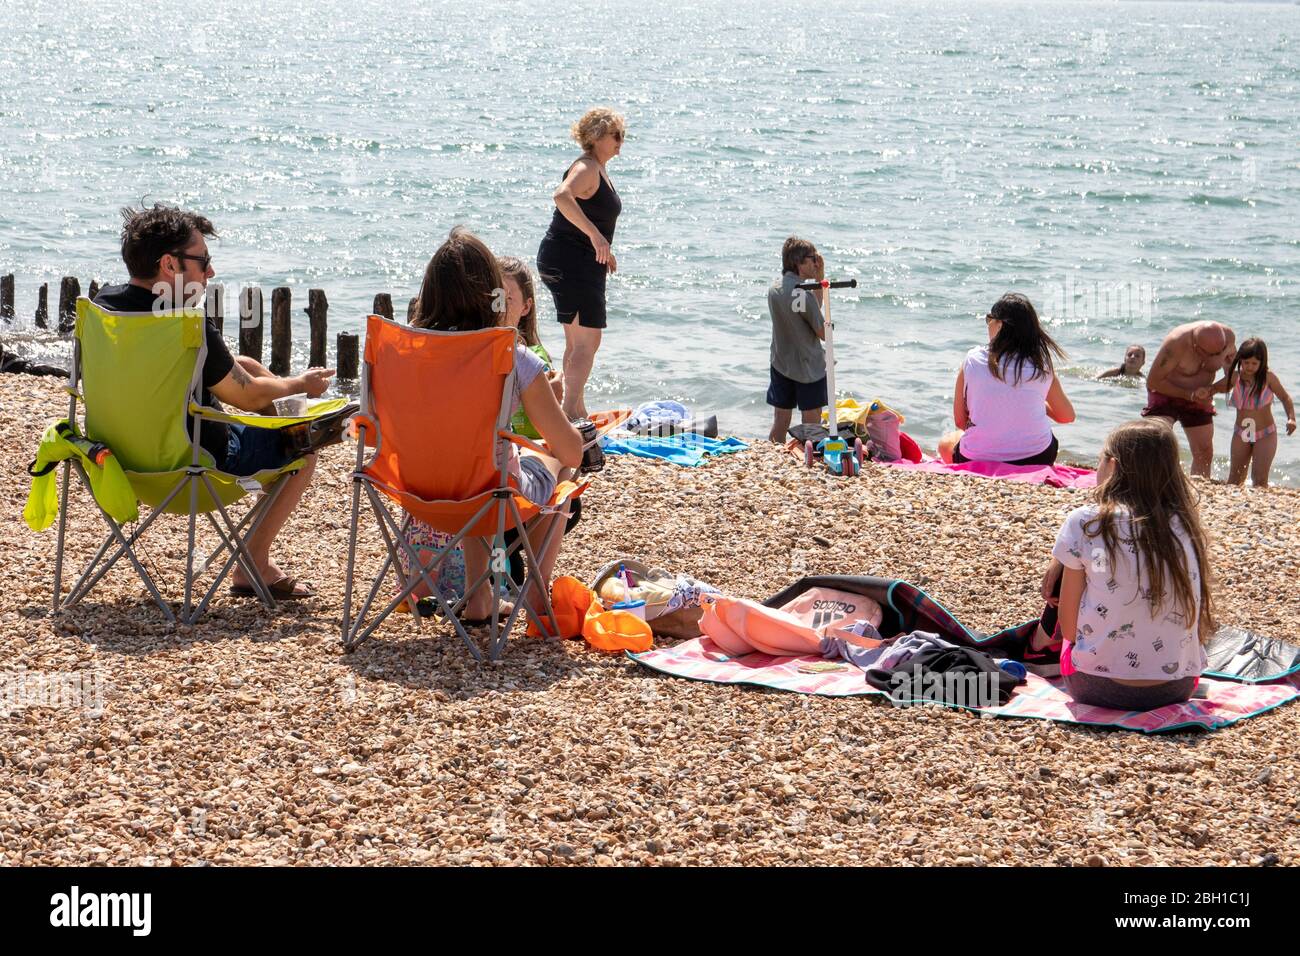 Families on a British pebble beach in summer a typical British pebble beach scene Stock Photo